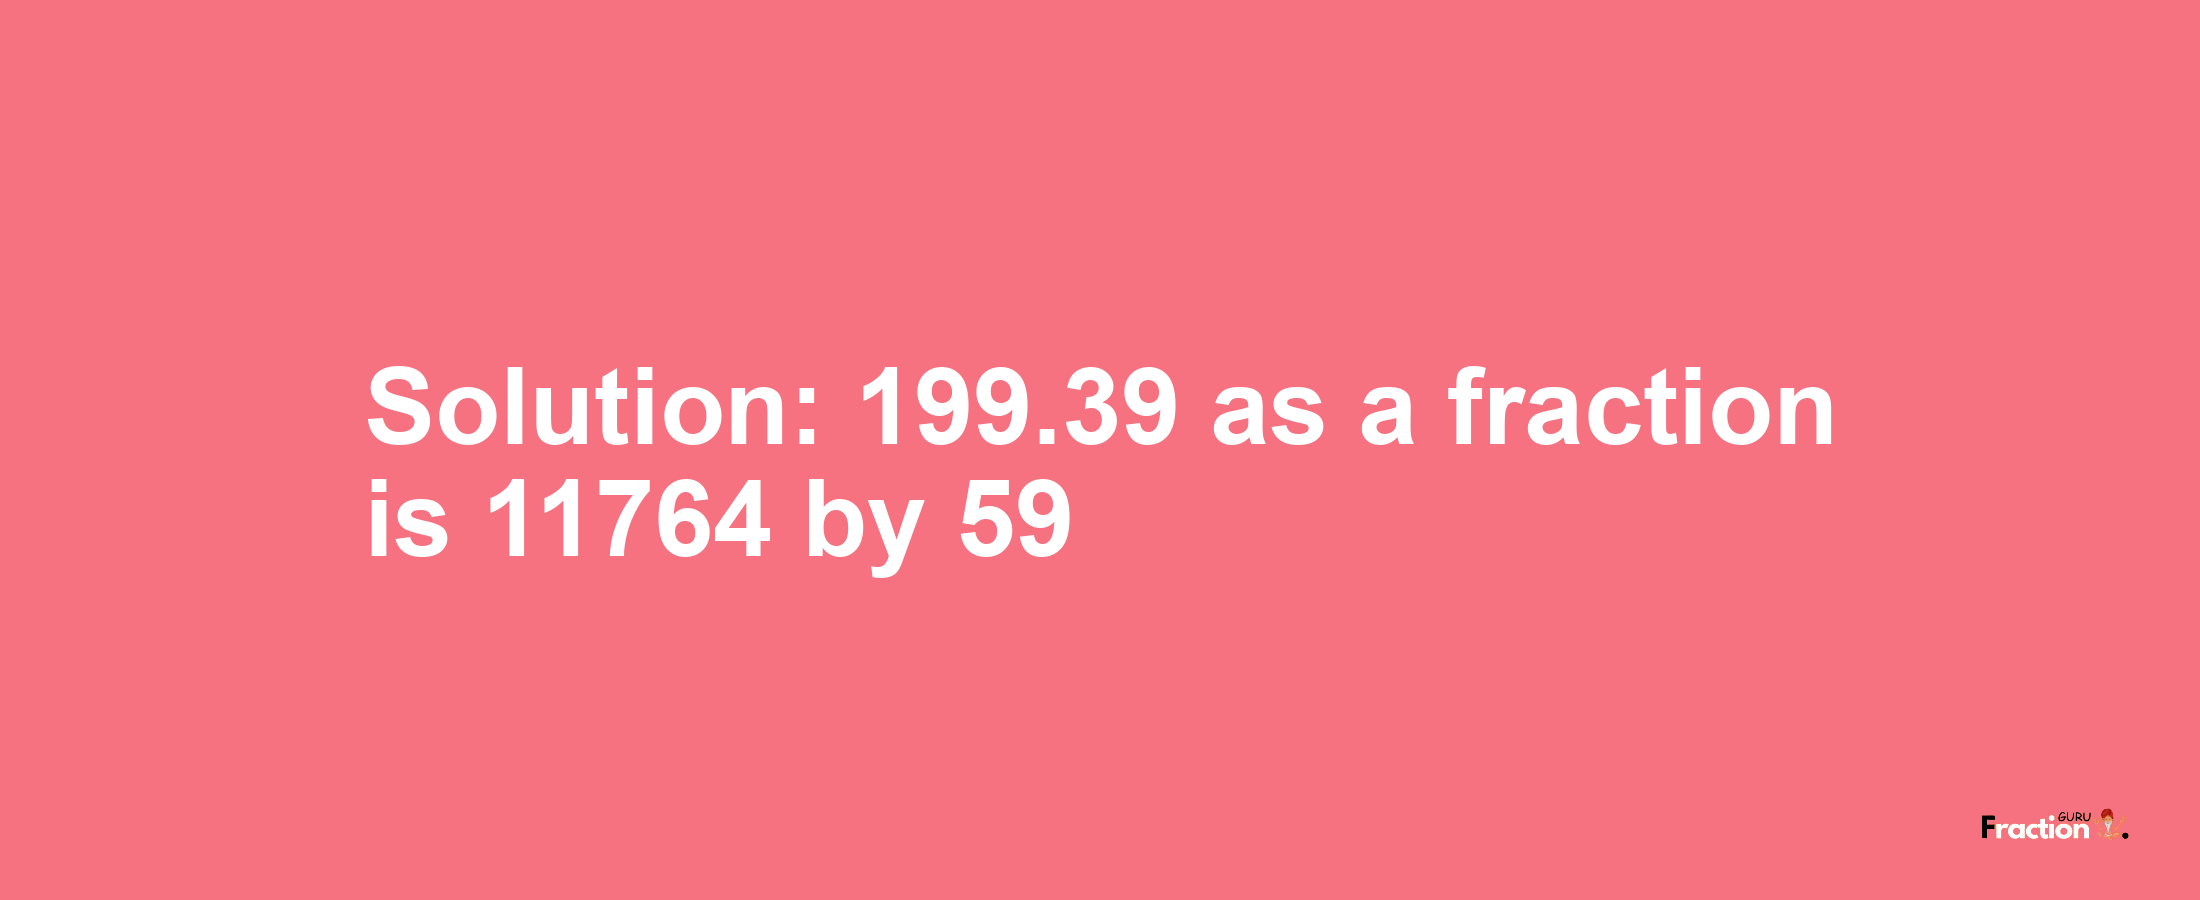 Solution:199.39 as a fraction is 11764/59